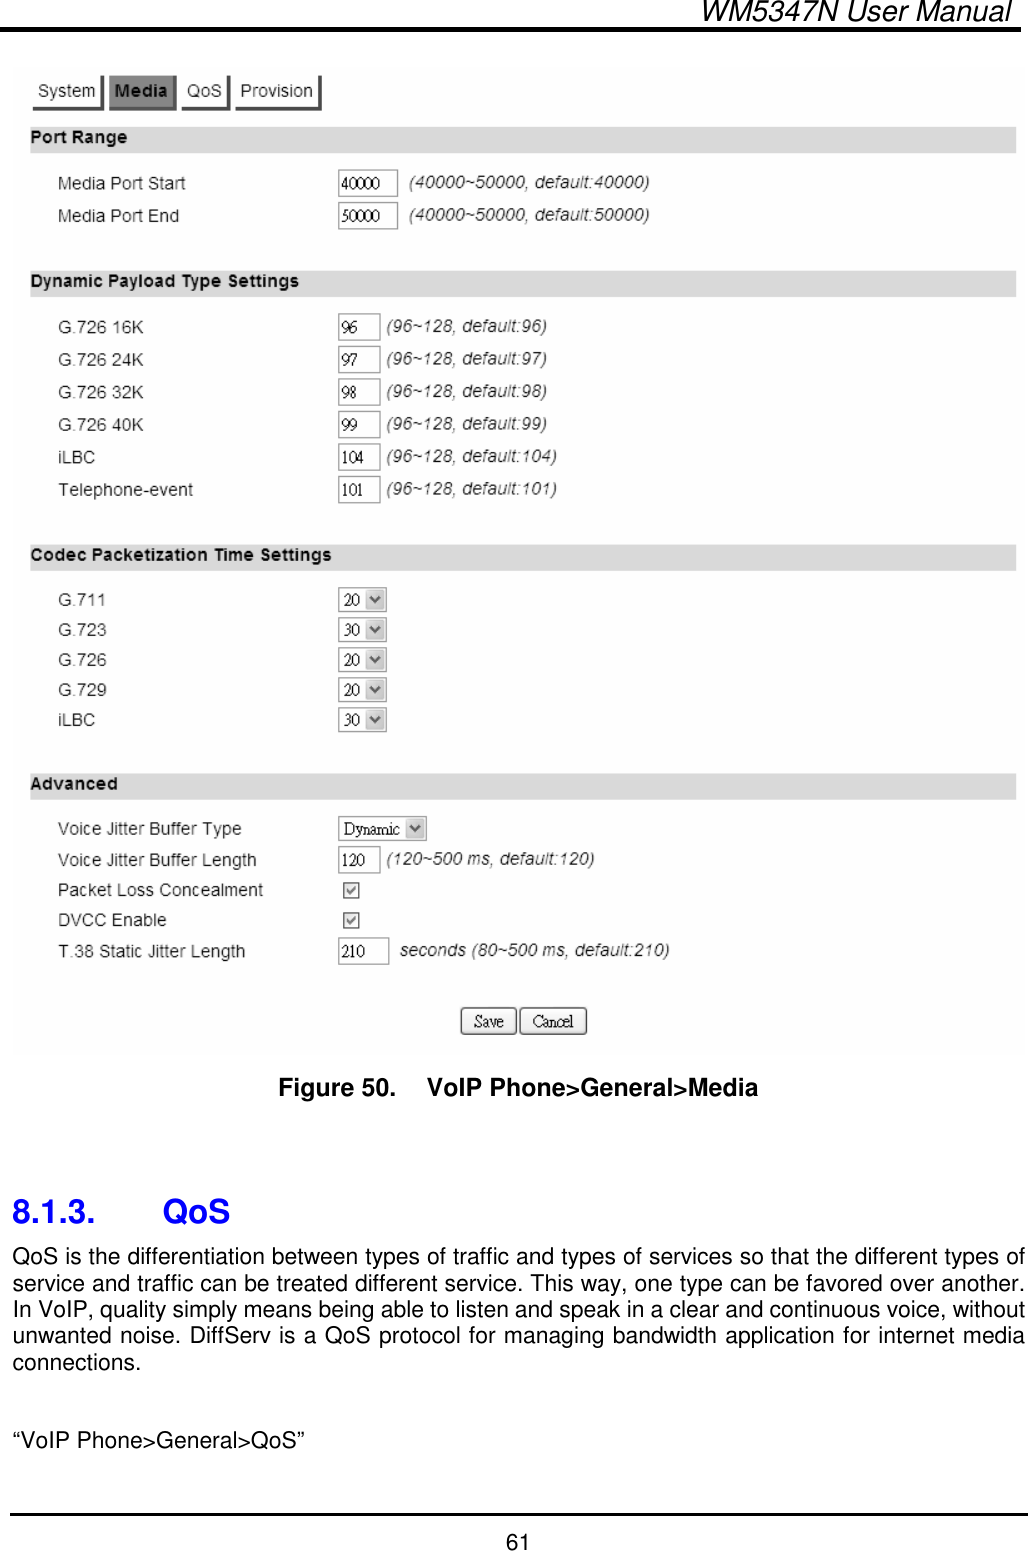  WM5347N User Manual  61  Figure 50.   VoIP Phone&gt;General&gt;Media   8.1.3.  QoS QoS is the differentiation between types of traffic and types of services so that the different types of service and traffic can be treated different service. This way, one type can be favored over another. In VoIP, quality simply means being able to listen and speak in a clear and continuous voice, without unwanted noise. DiffServ is a QoS protocol for managing bandwidth application for internet media connections.  “VoIP Phone&gt;General&gt;QoS”  